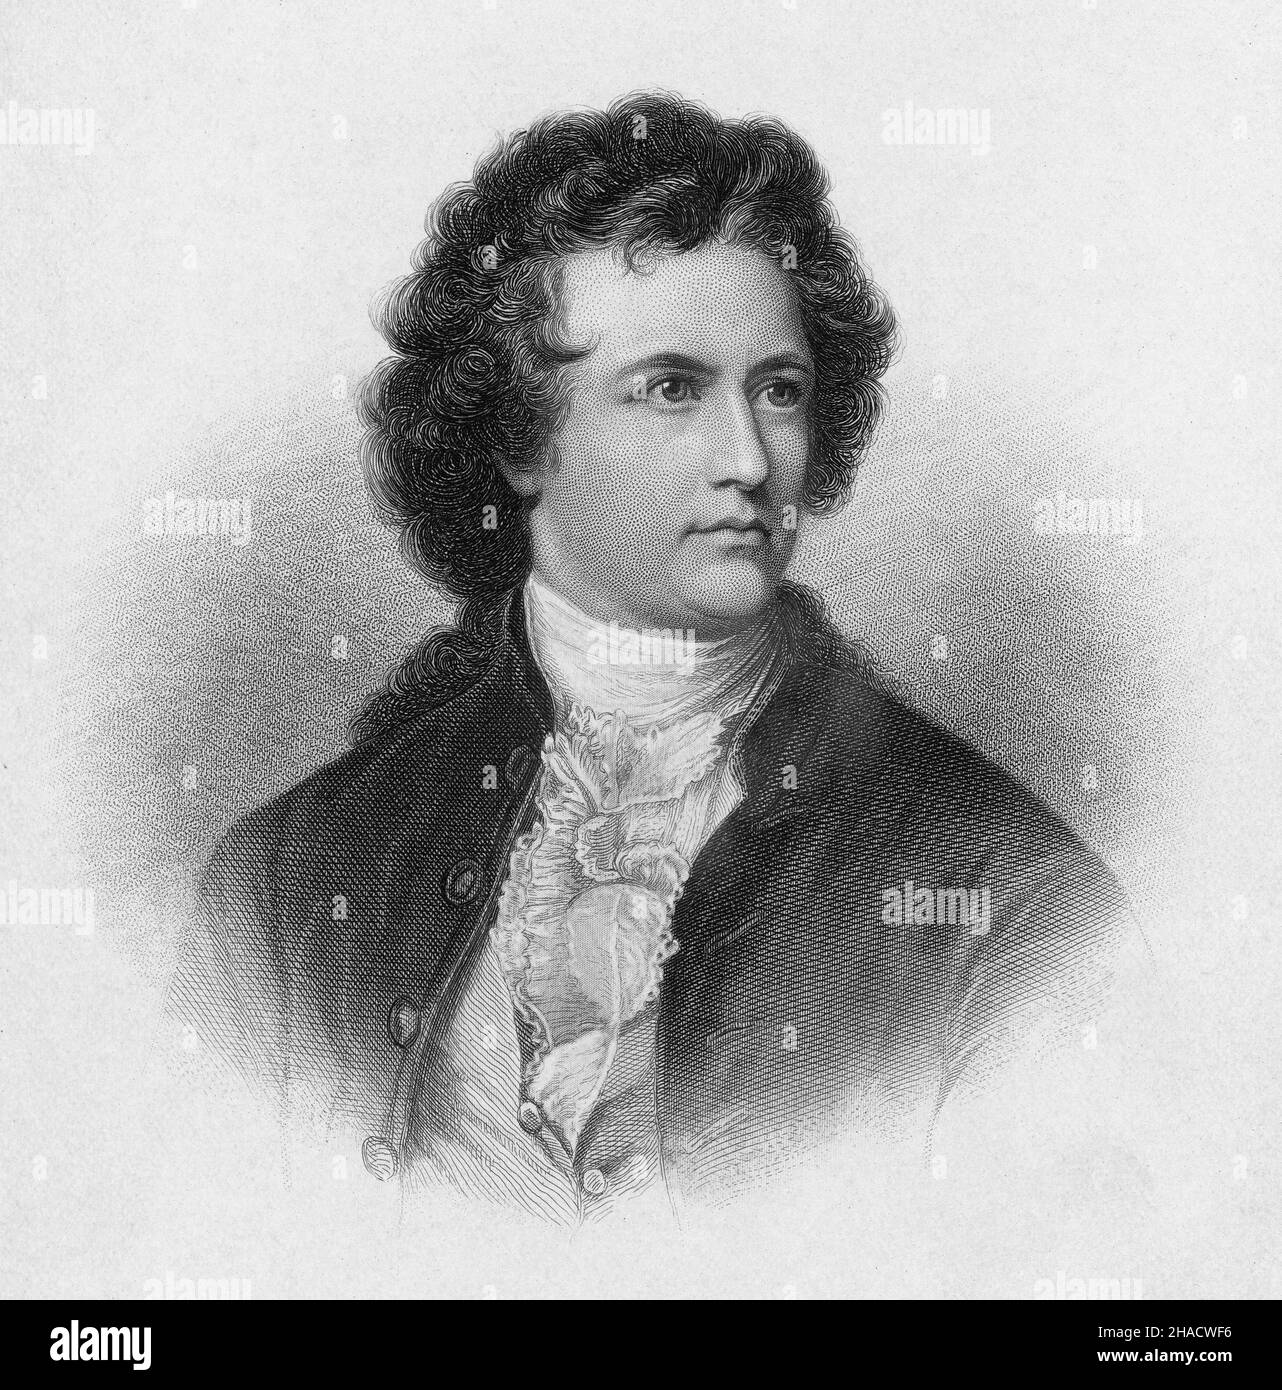 Antique circa 1870 engraving of Johann Wolfgang von Goethe by Henry Bryan Hall (New York). Goethe (1749-1832) was a German poet, playwright, novelist, scientist, statesman, theatre director, and critic. SOURCE: ORIGINAL ENGRAVING Stock Photo